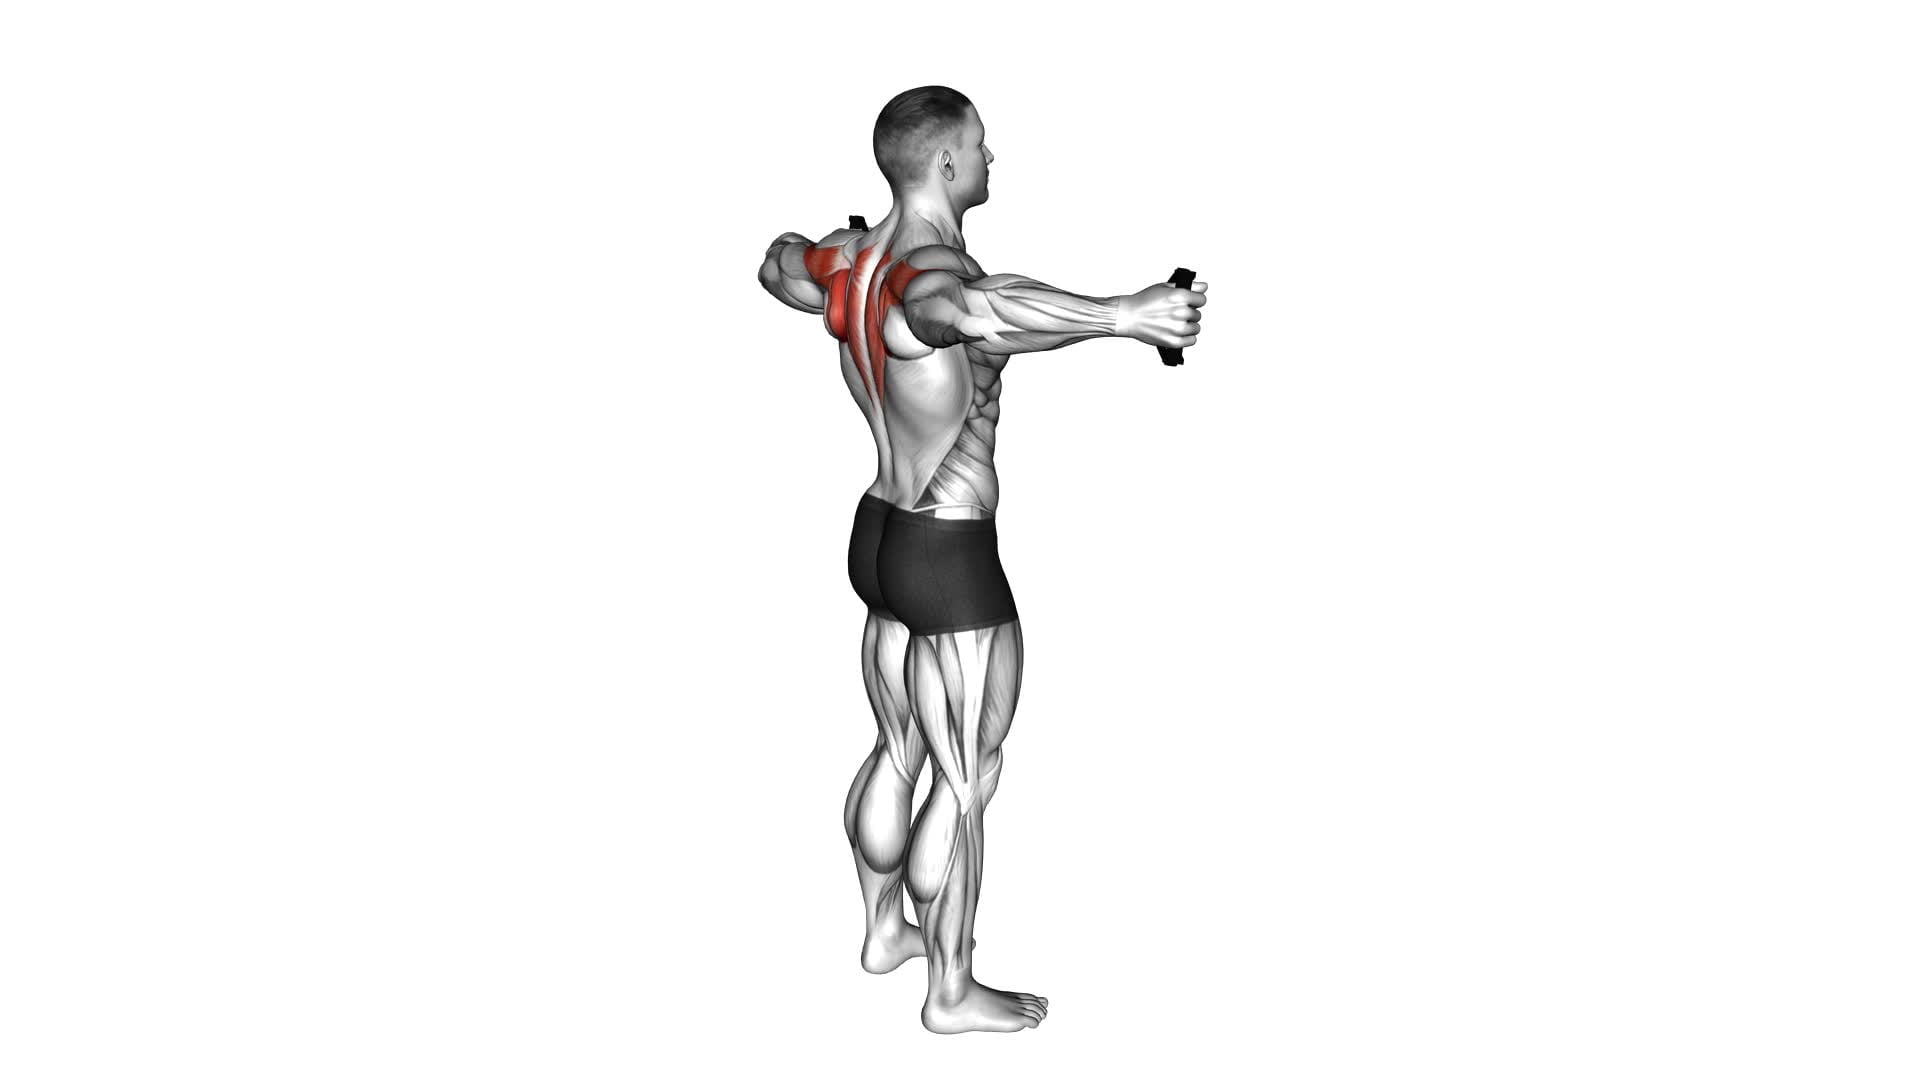 Band Pull Apart - Video Exercise Guide & Tips